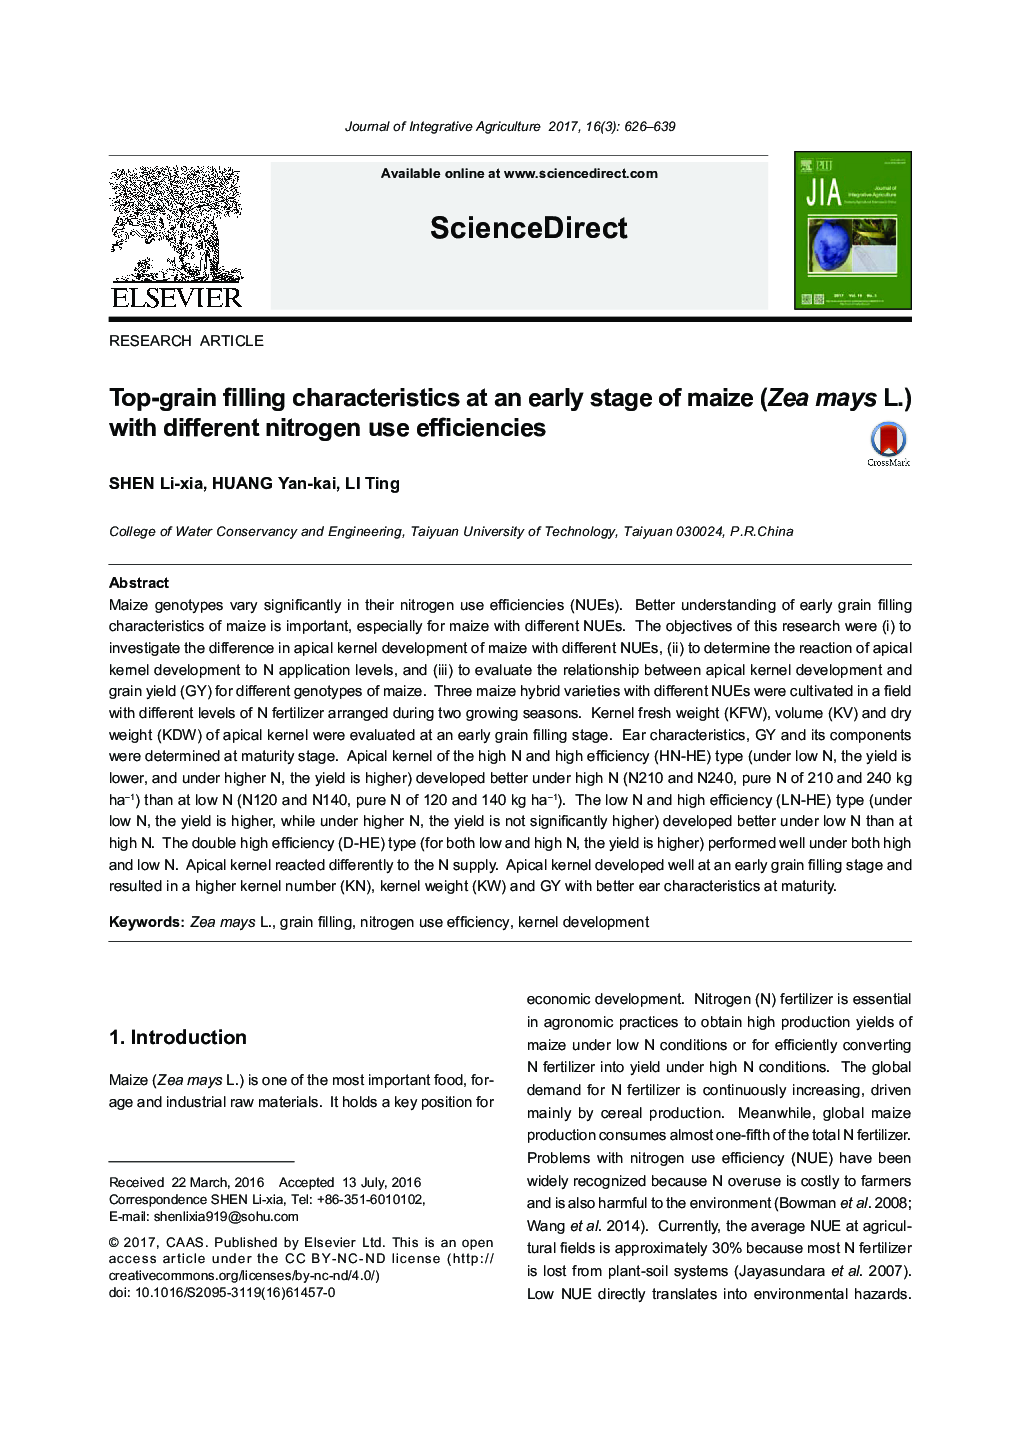 Top-grain filling characteristics at an early stage of maize (Zea mays L.) with different nitrogen use efficiencies